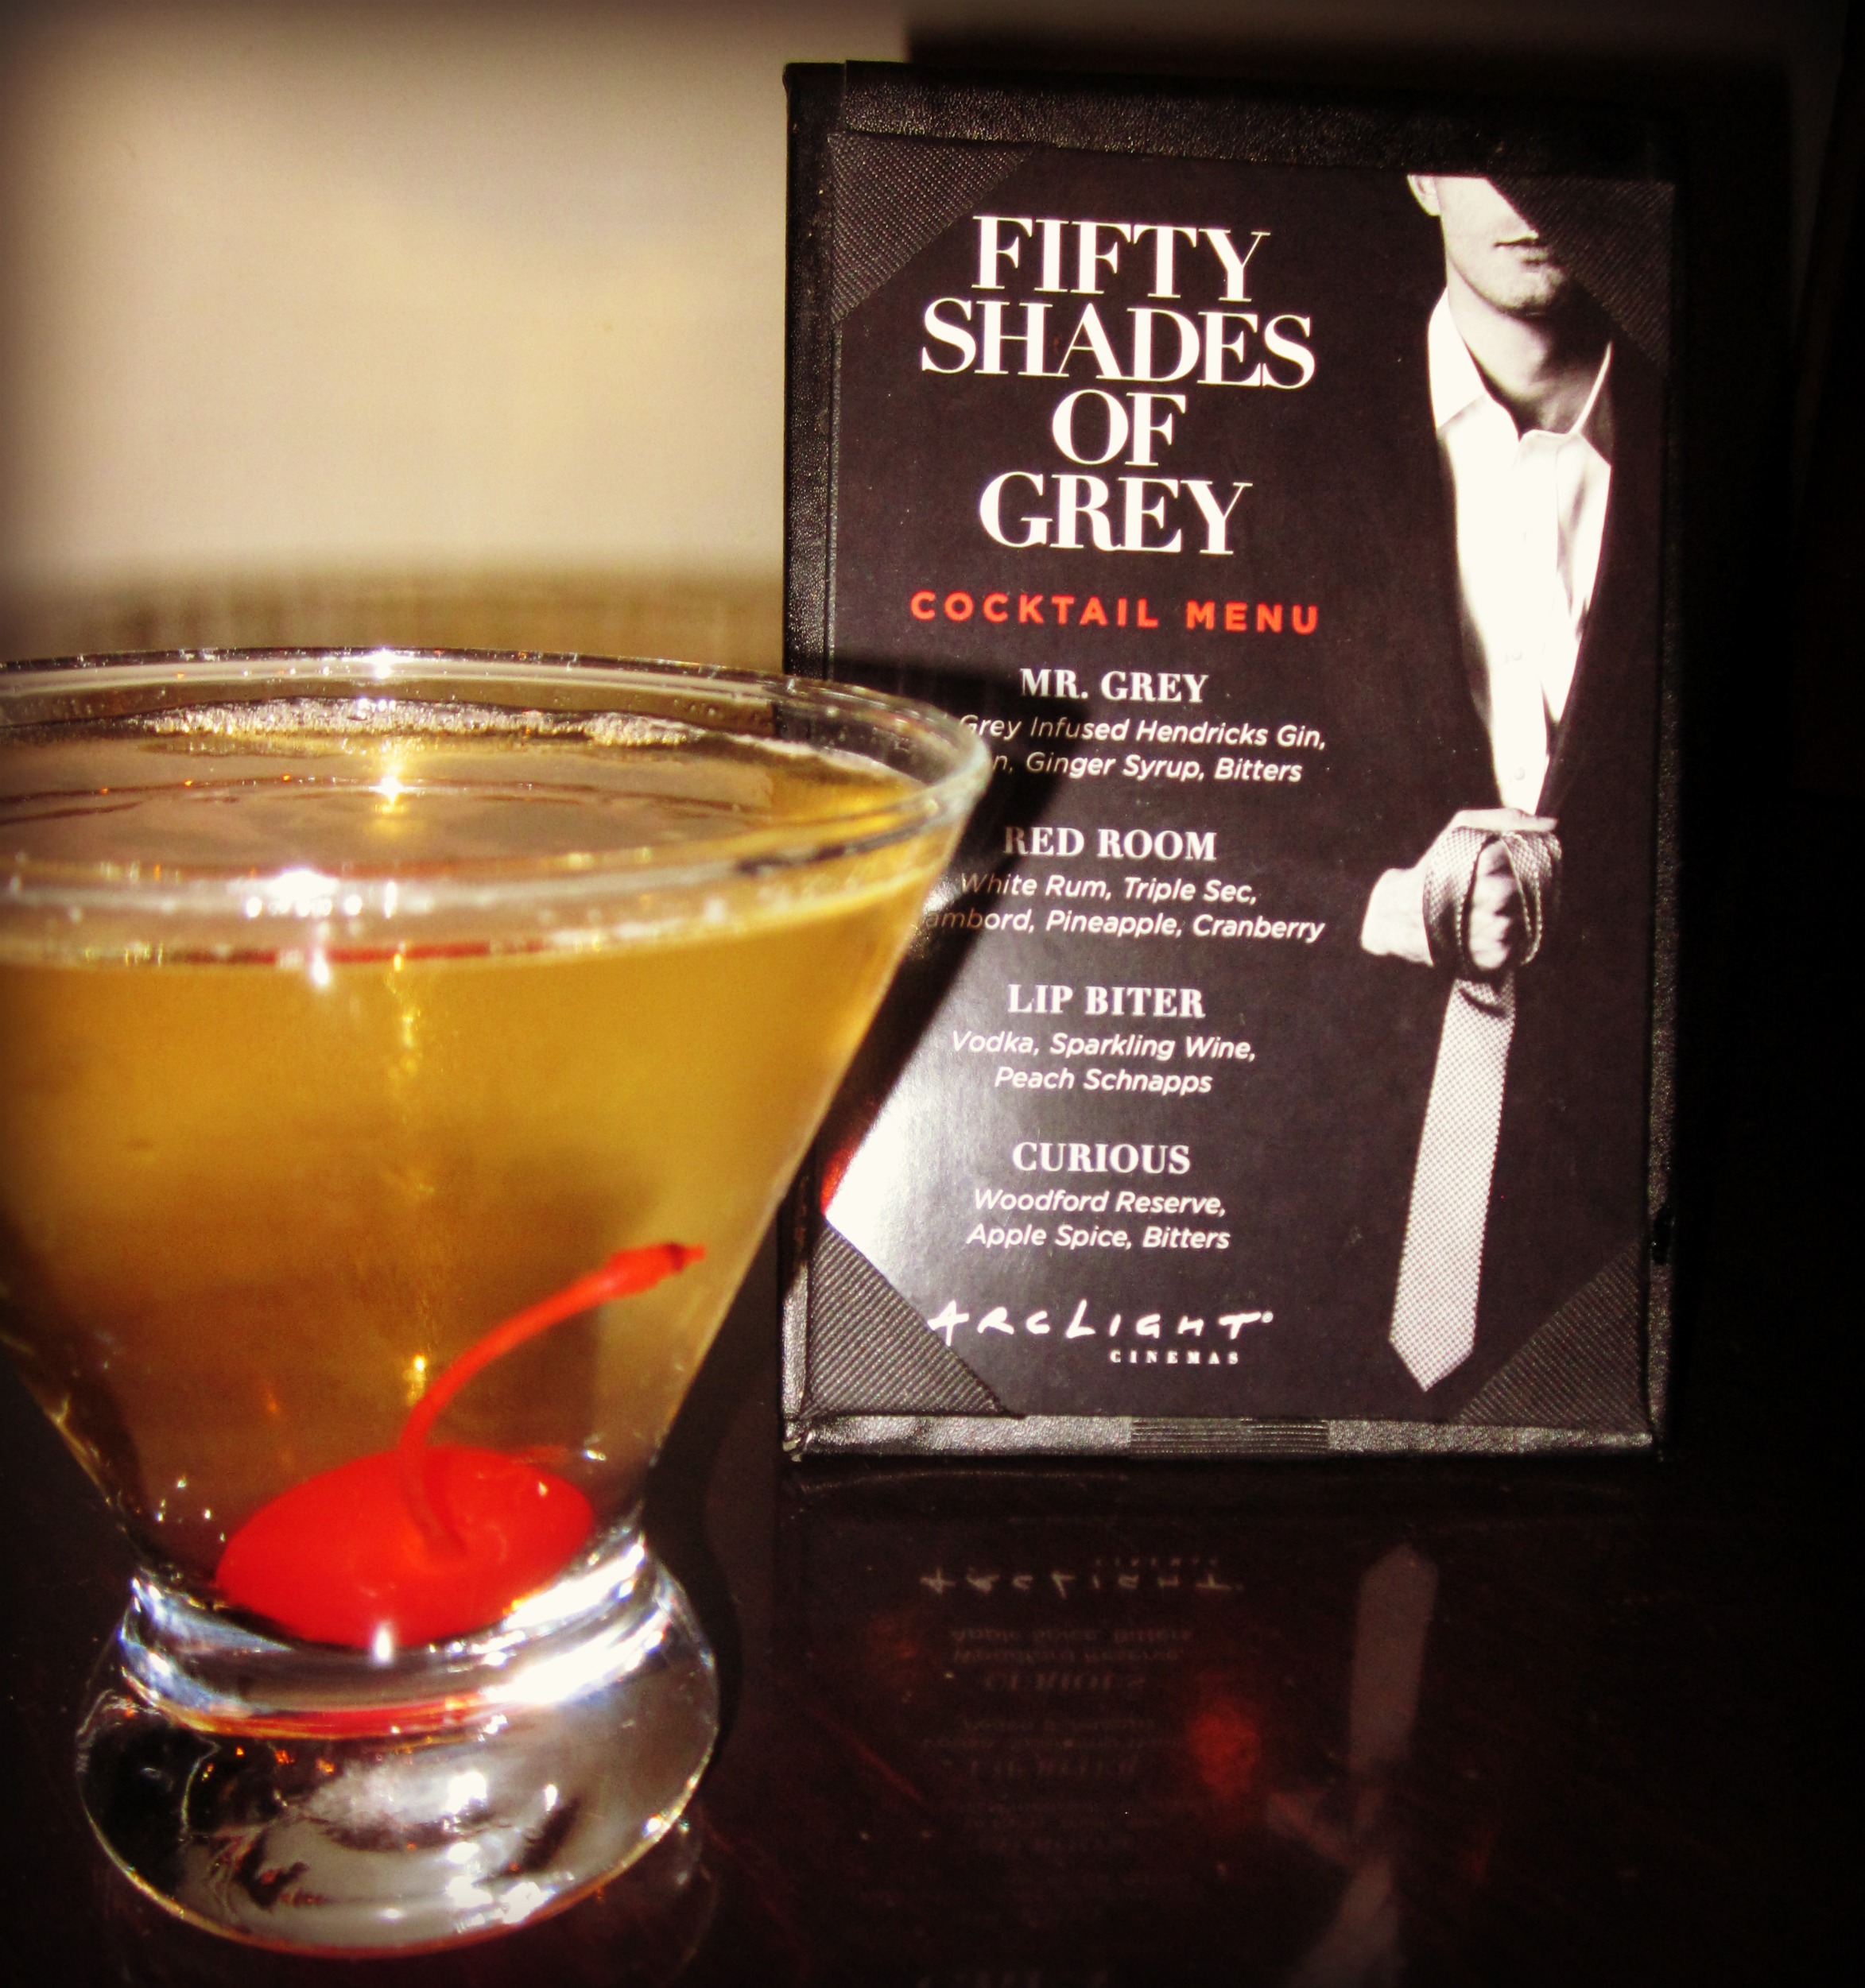 50 Shades of Grey Cocktails, Fifty Shades of Grey Cocktails